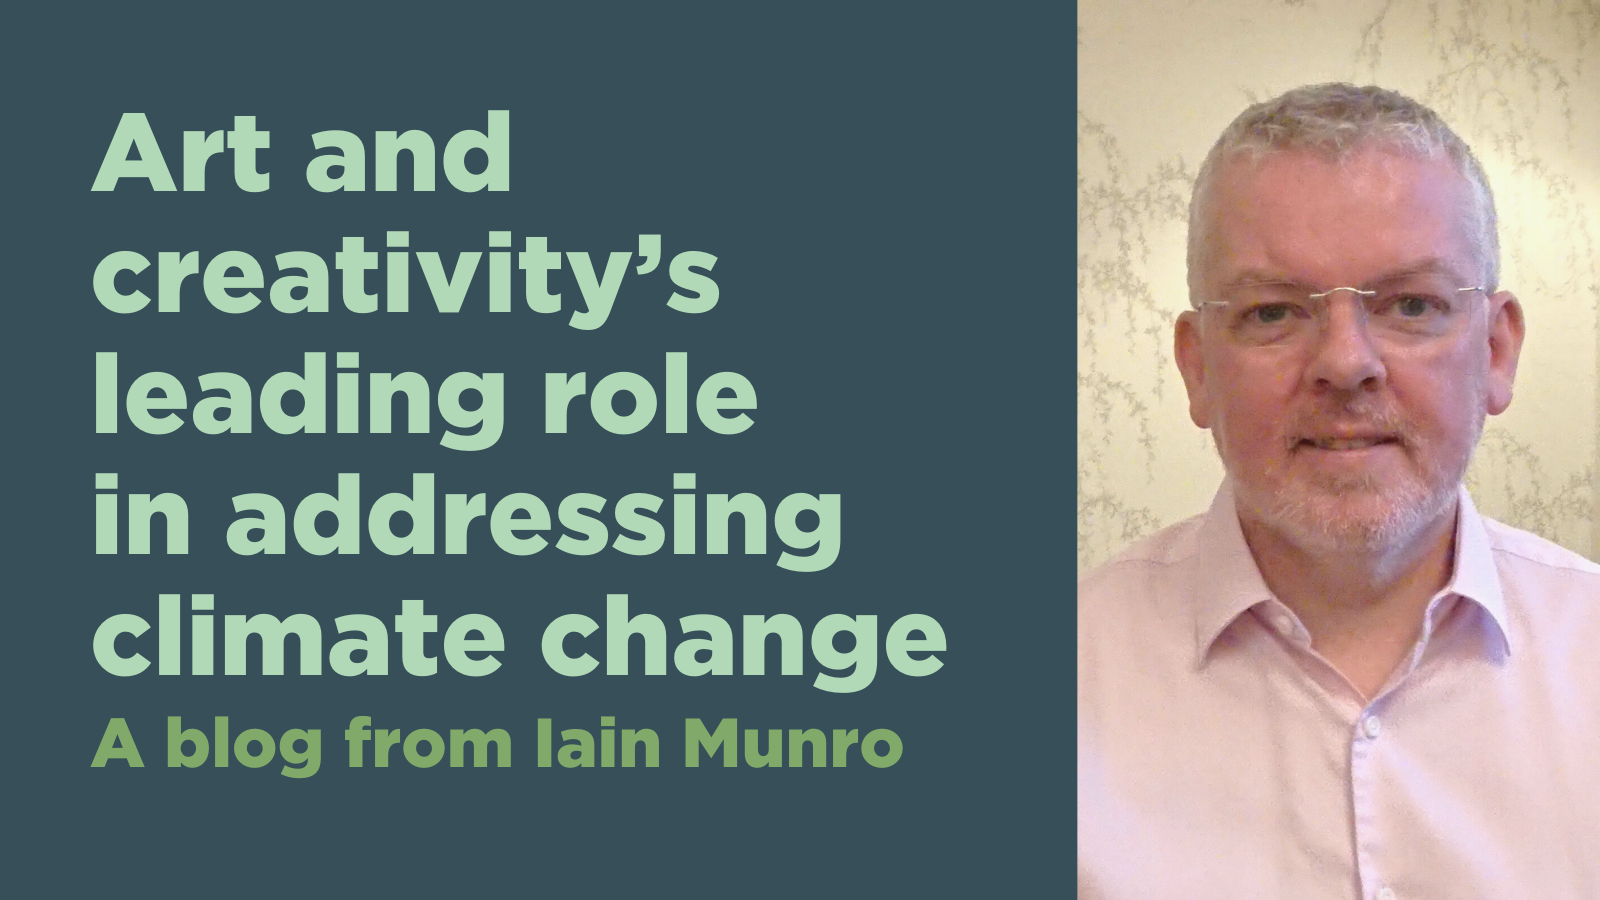 Art and creativity's leading role in addressing climate change - a blog from Iain Munro